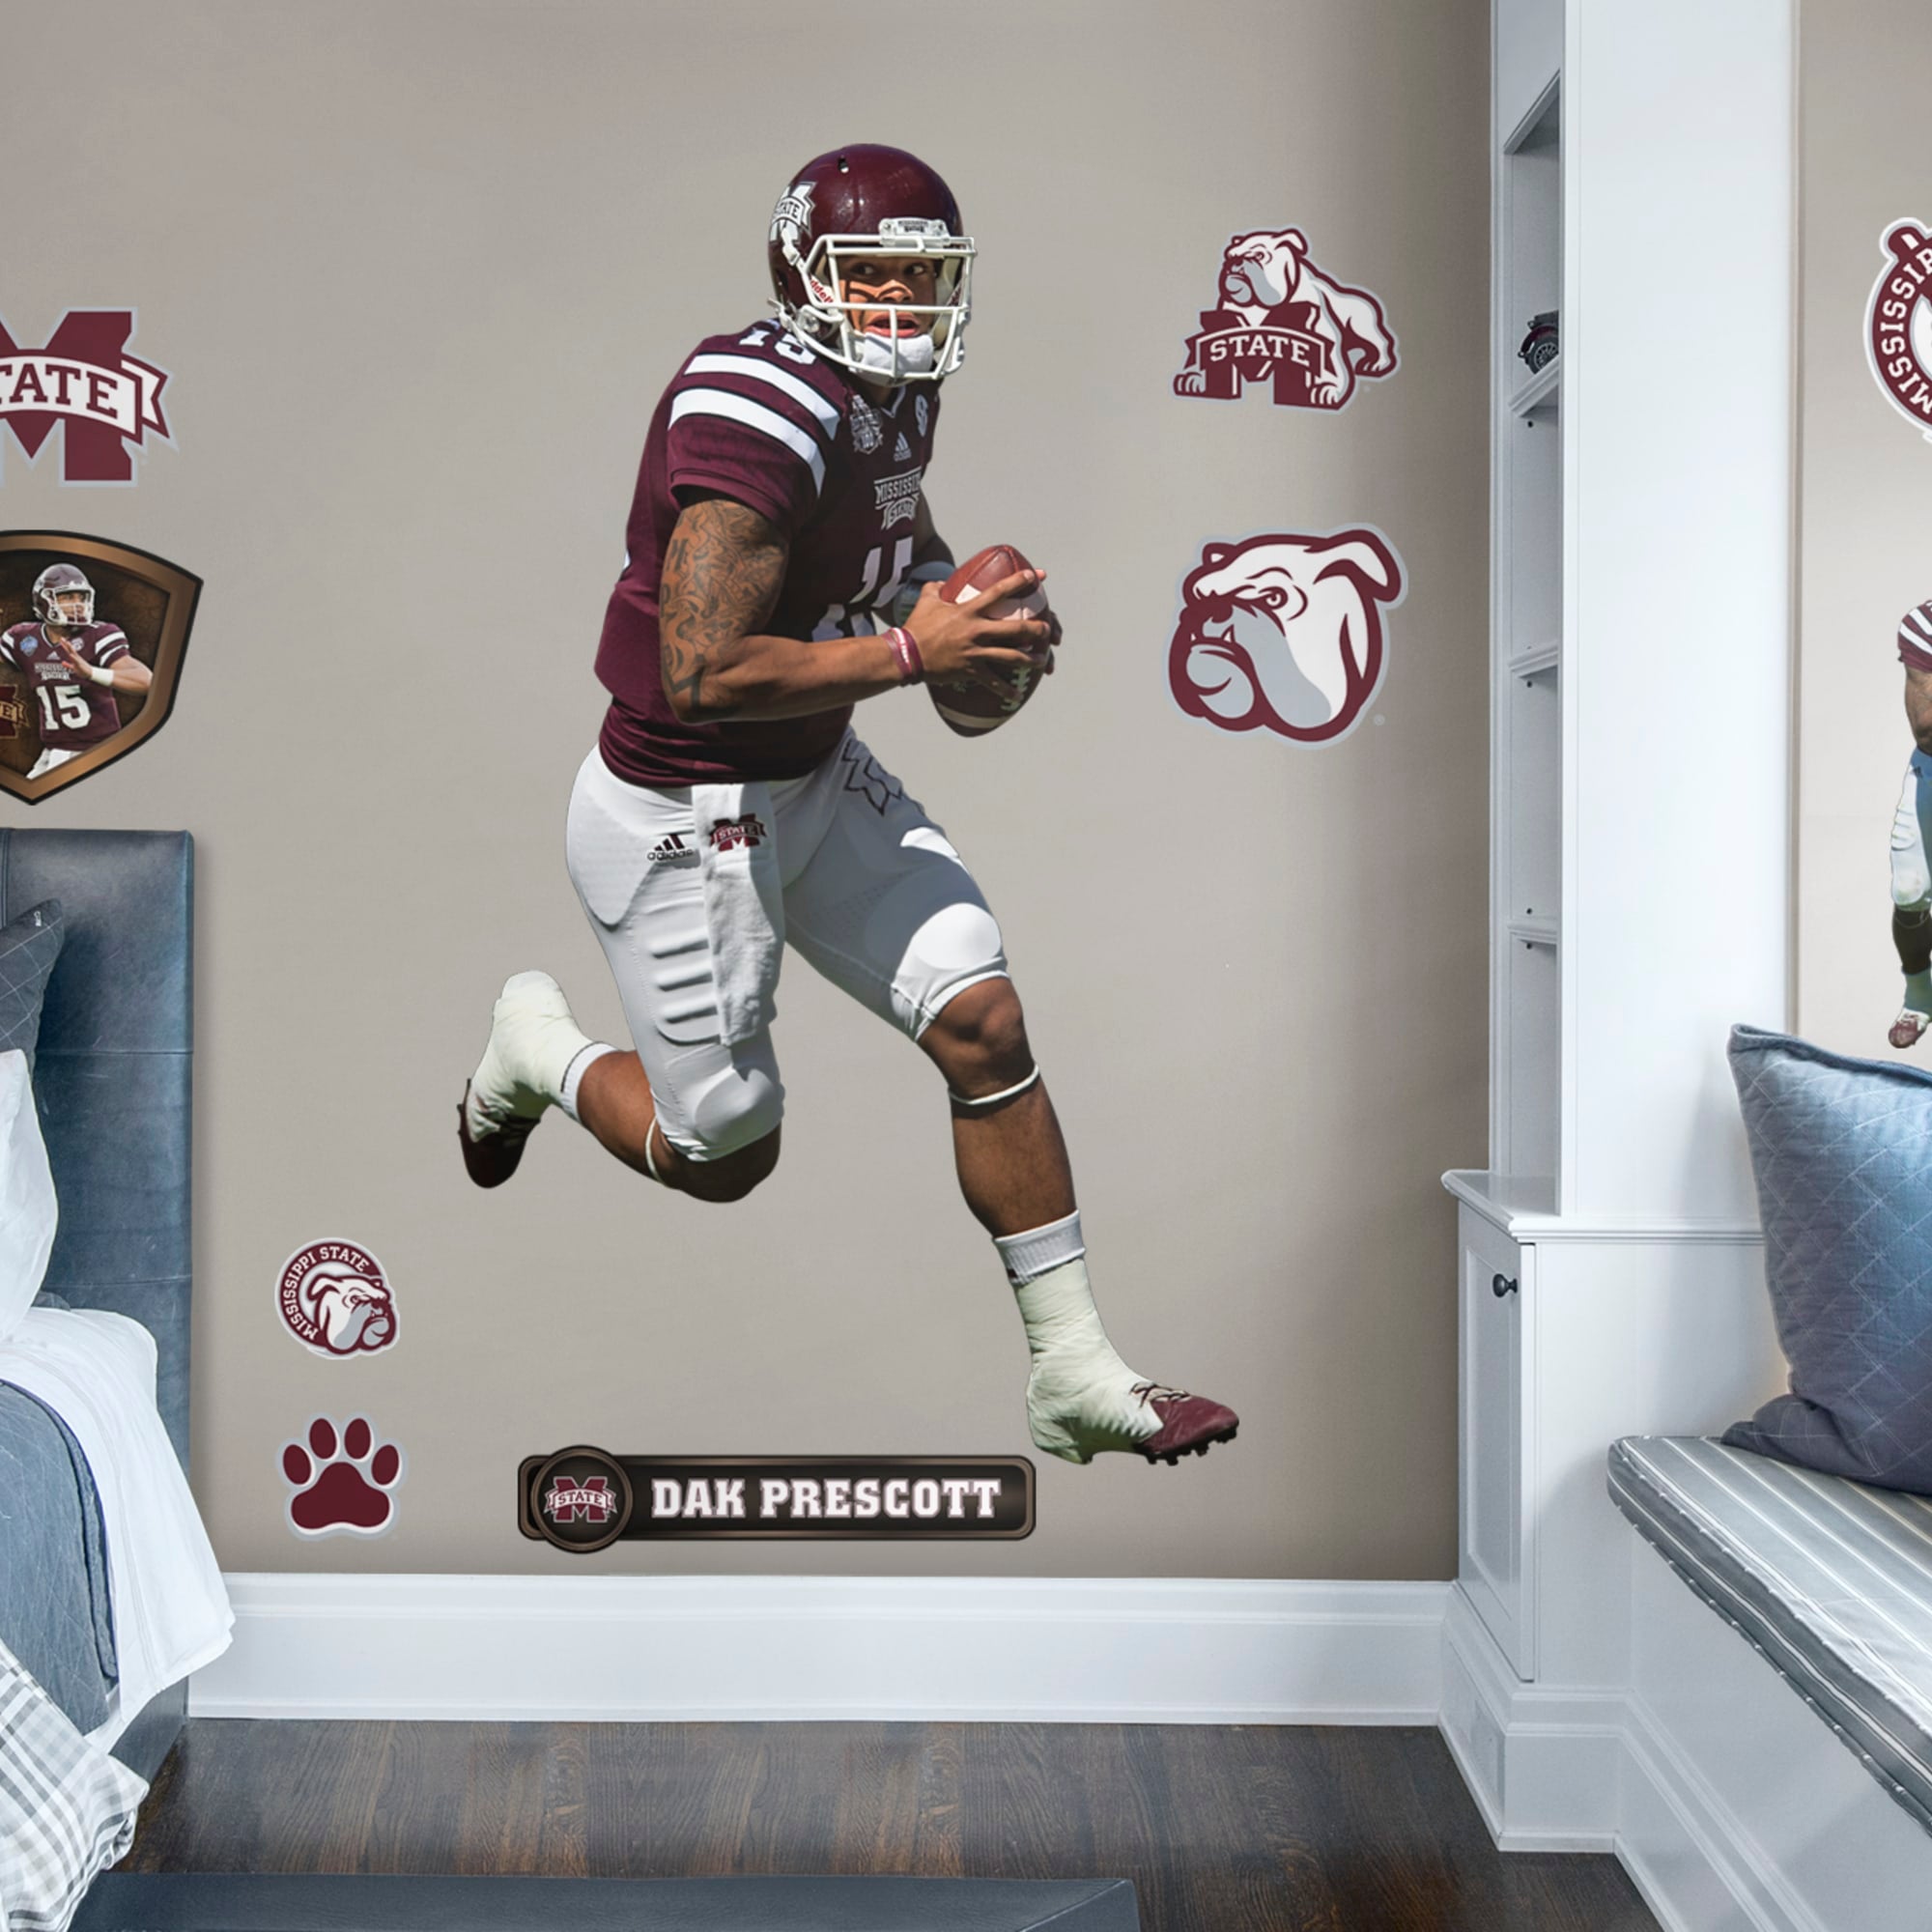 Dak Prescott for Mississippi State Bulldogs: Mississippi State - Officially Licensed Removable Wall Decal Life-Size Athlete + 12